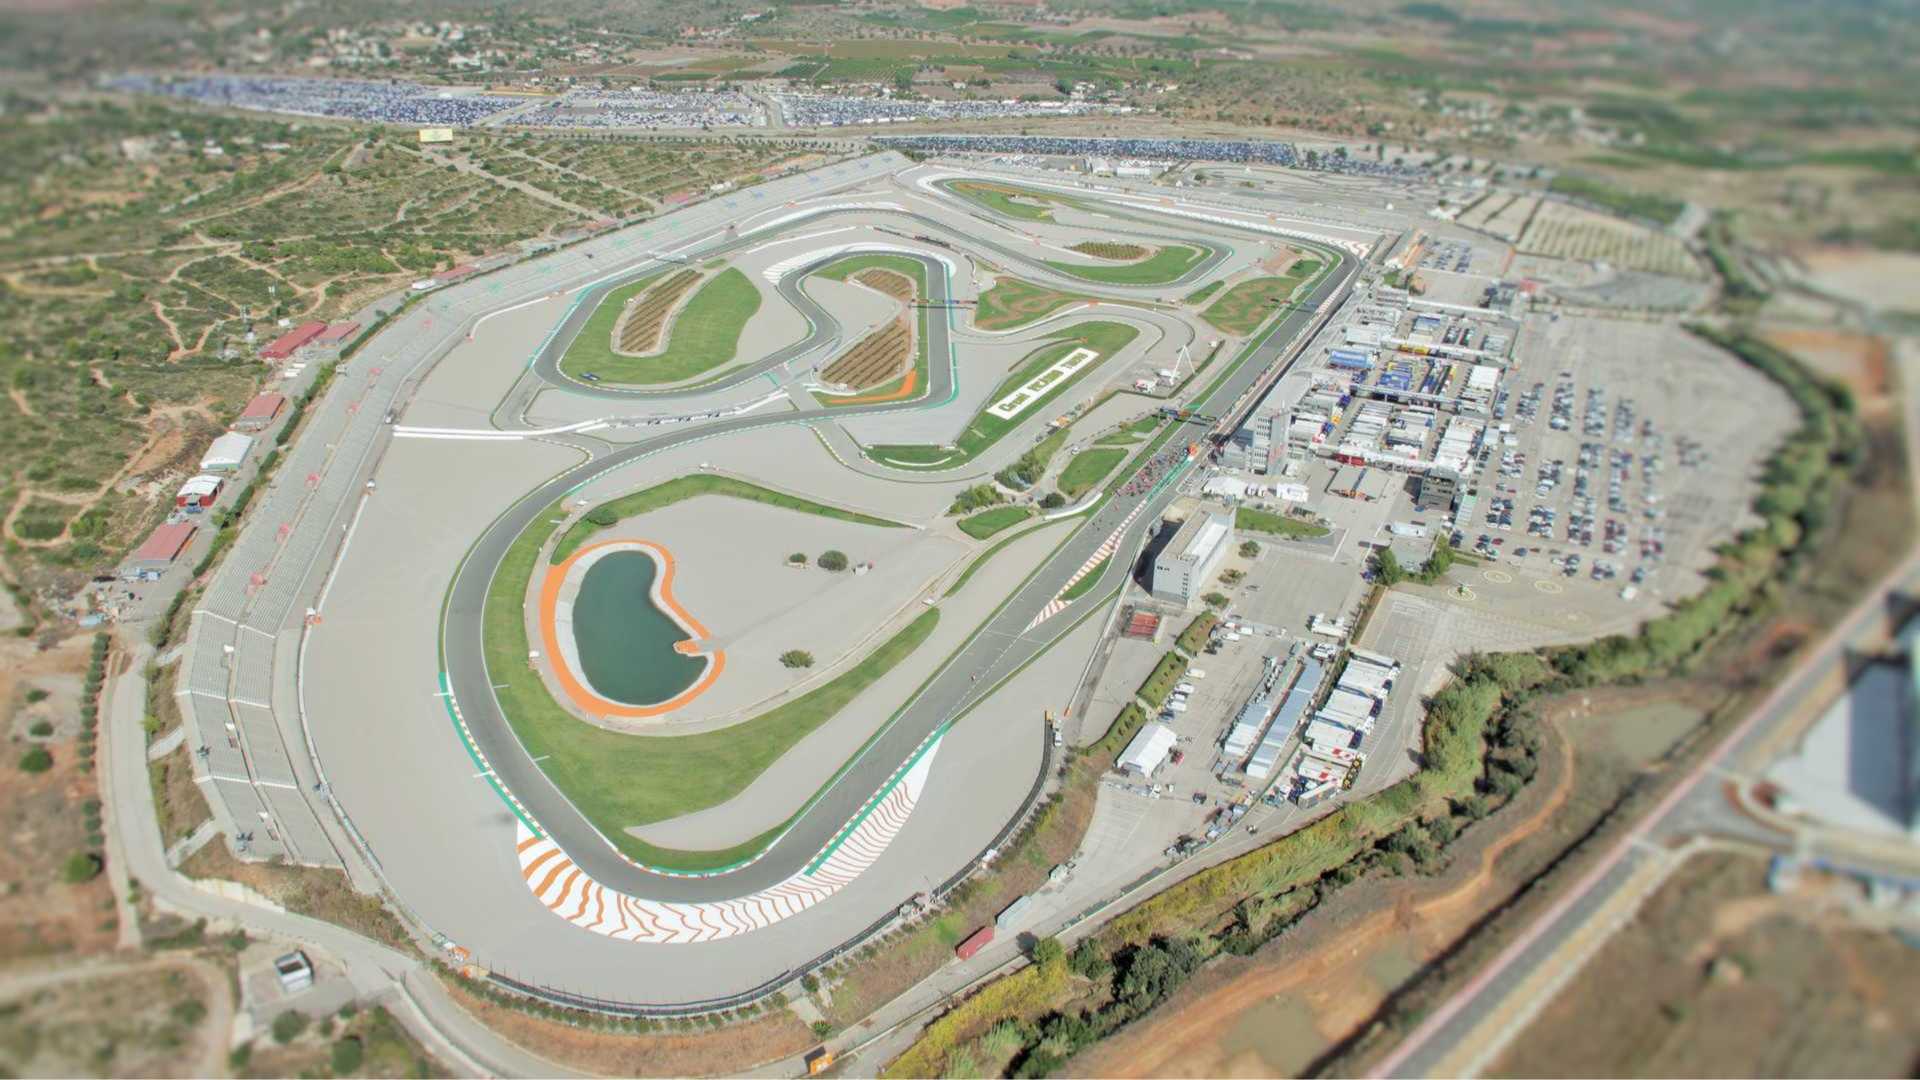 Aerial view of the Ricardo Tormo circuit in Valencia